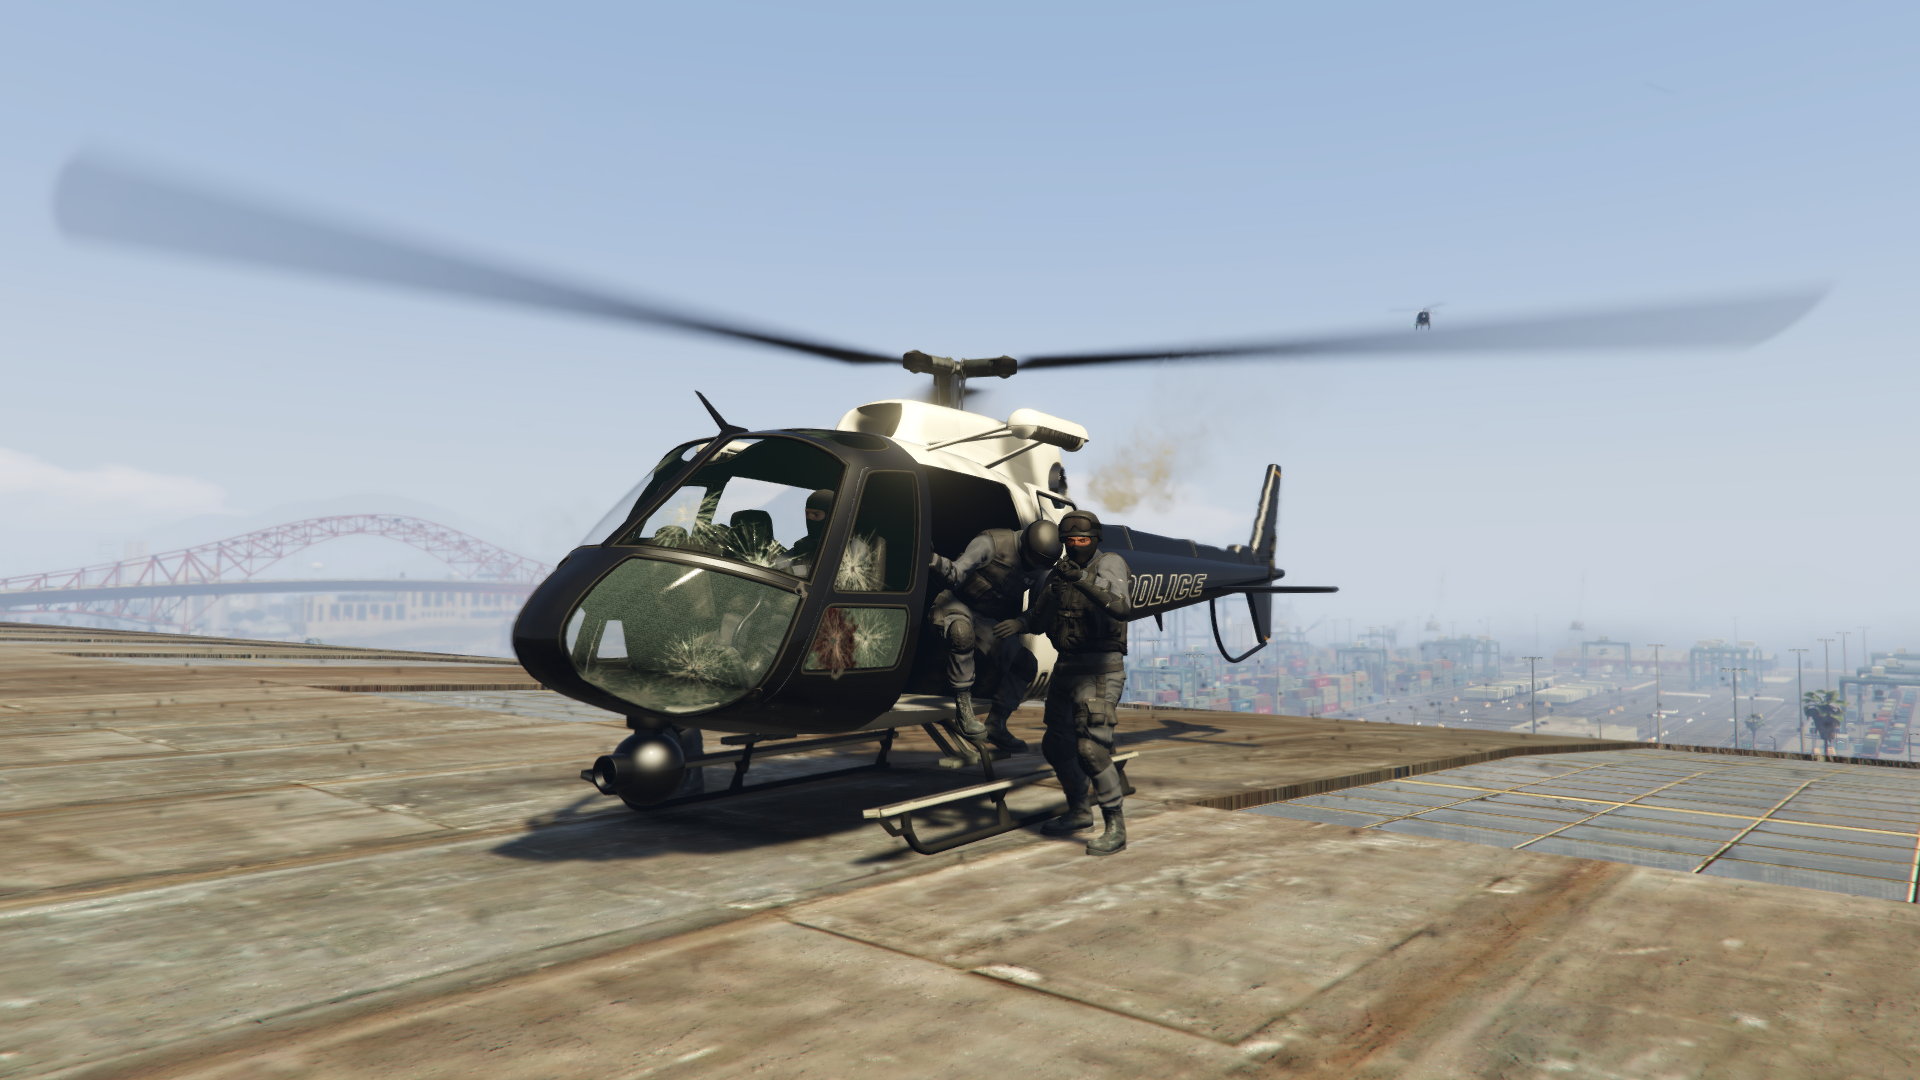 Grand Theft Auto V Cheats For PS3 - Spawn Planes, Helicopters, Cars, Boosts  and More - PlayStation LifeStyle